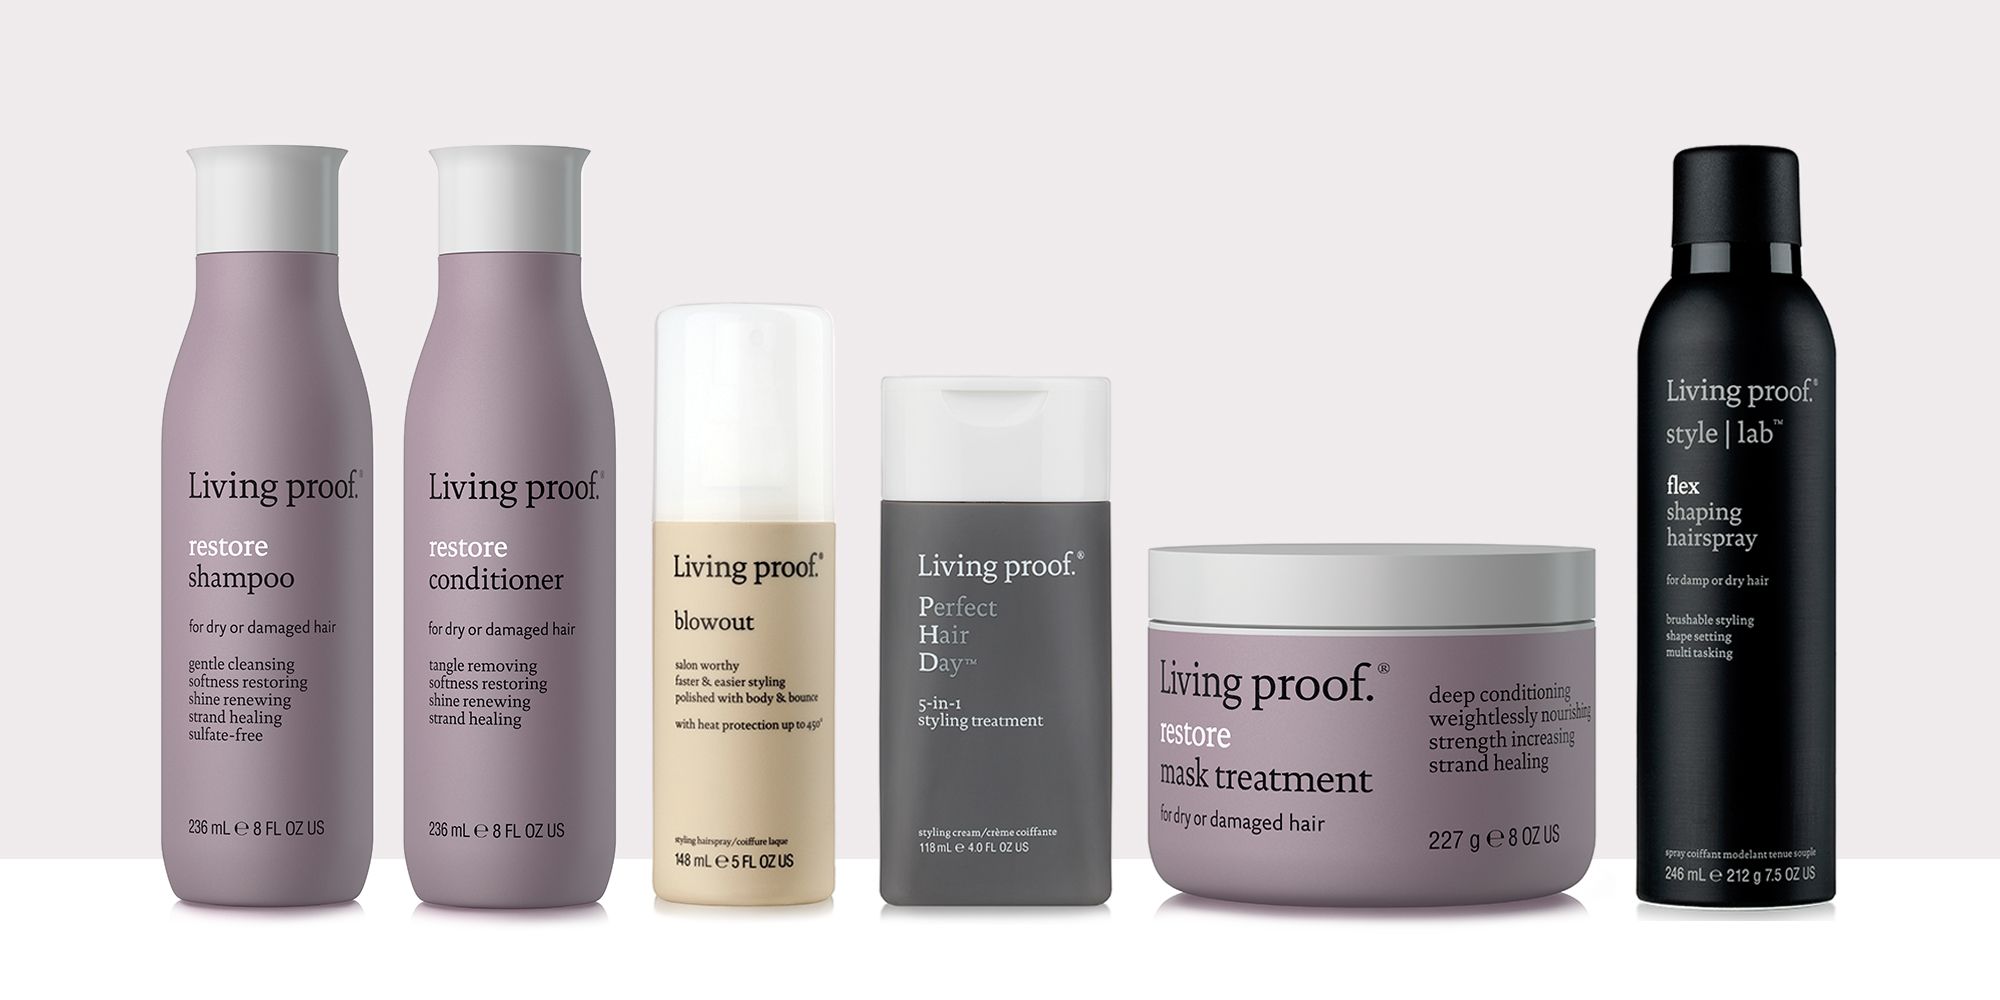 12 Best Living Proof Hair Products - Shampoos and Hairsprays by Living Proof